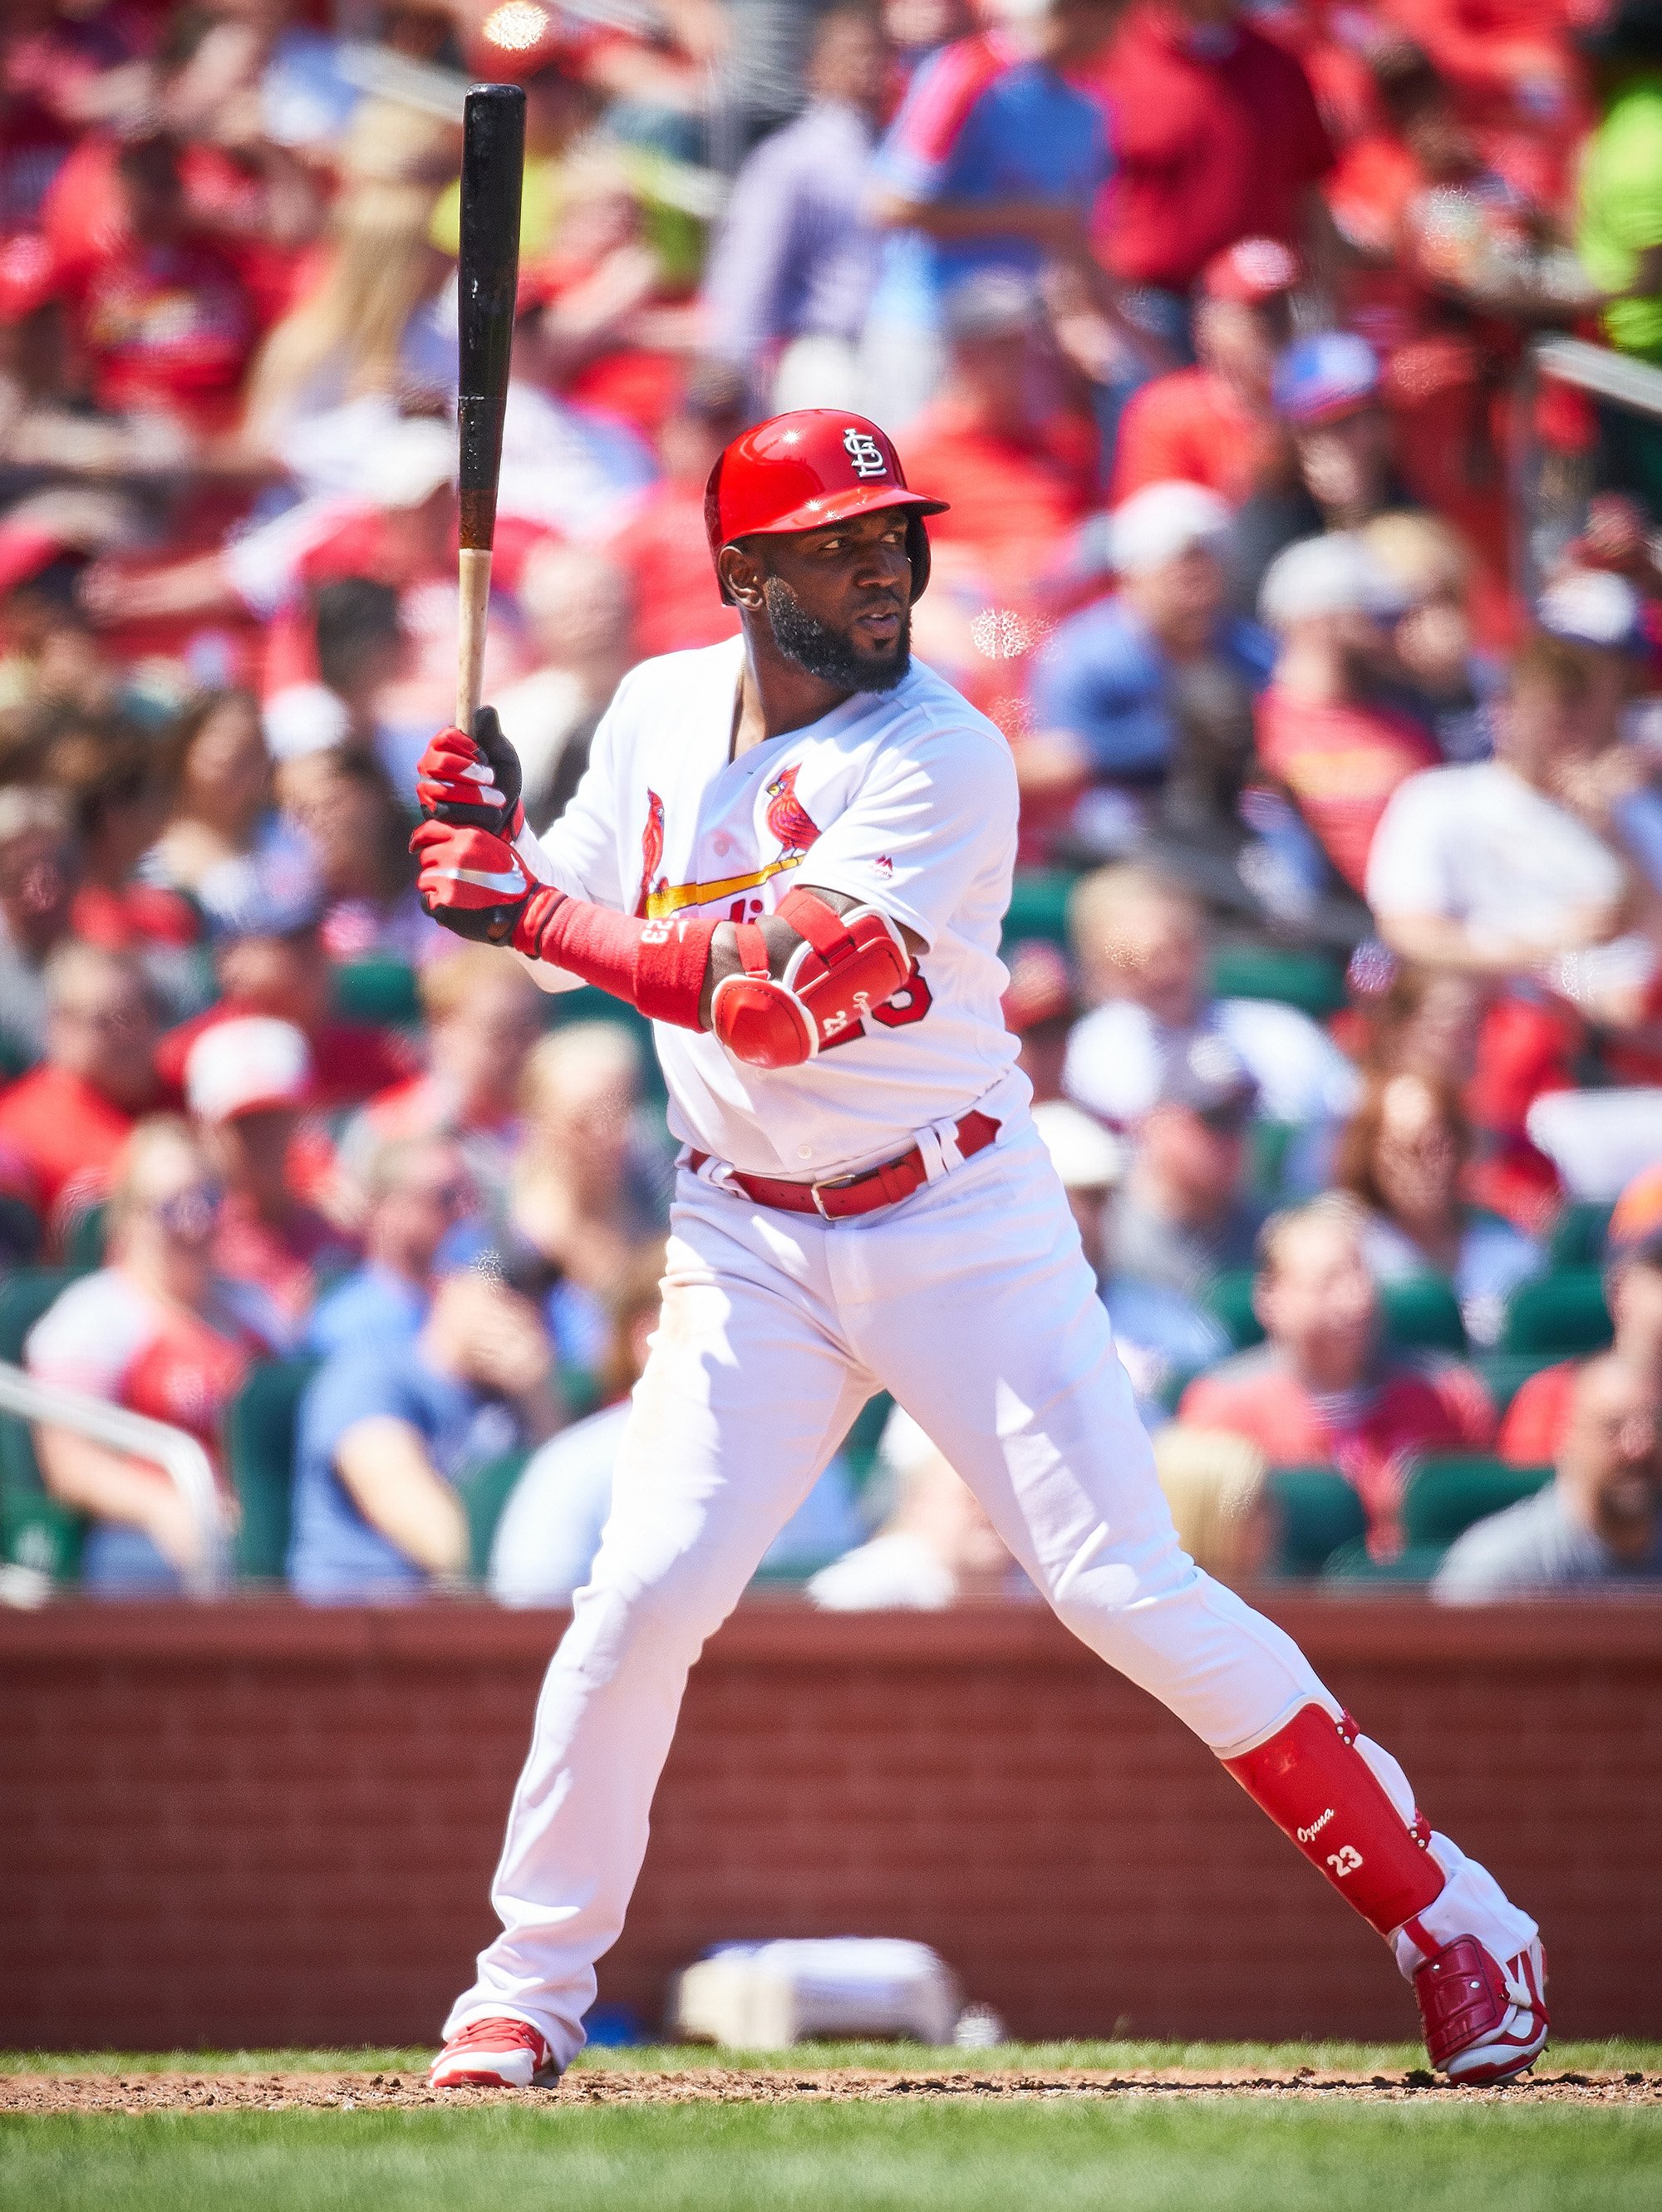 St. Louis Cardinals on X: #STLCards have reached an agreement